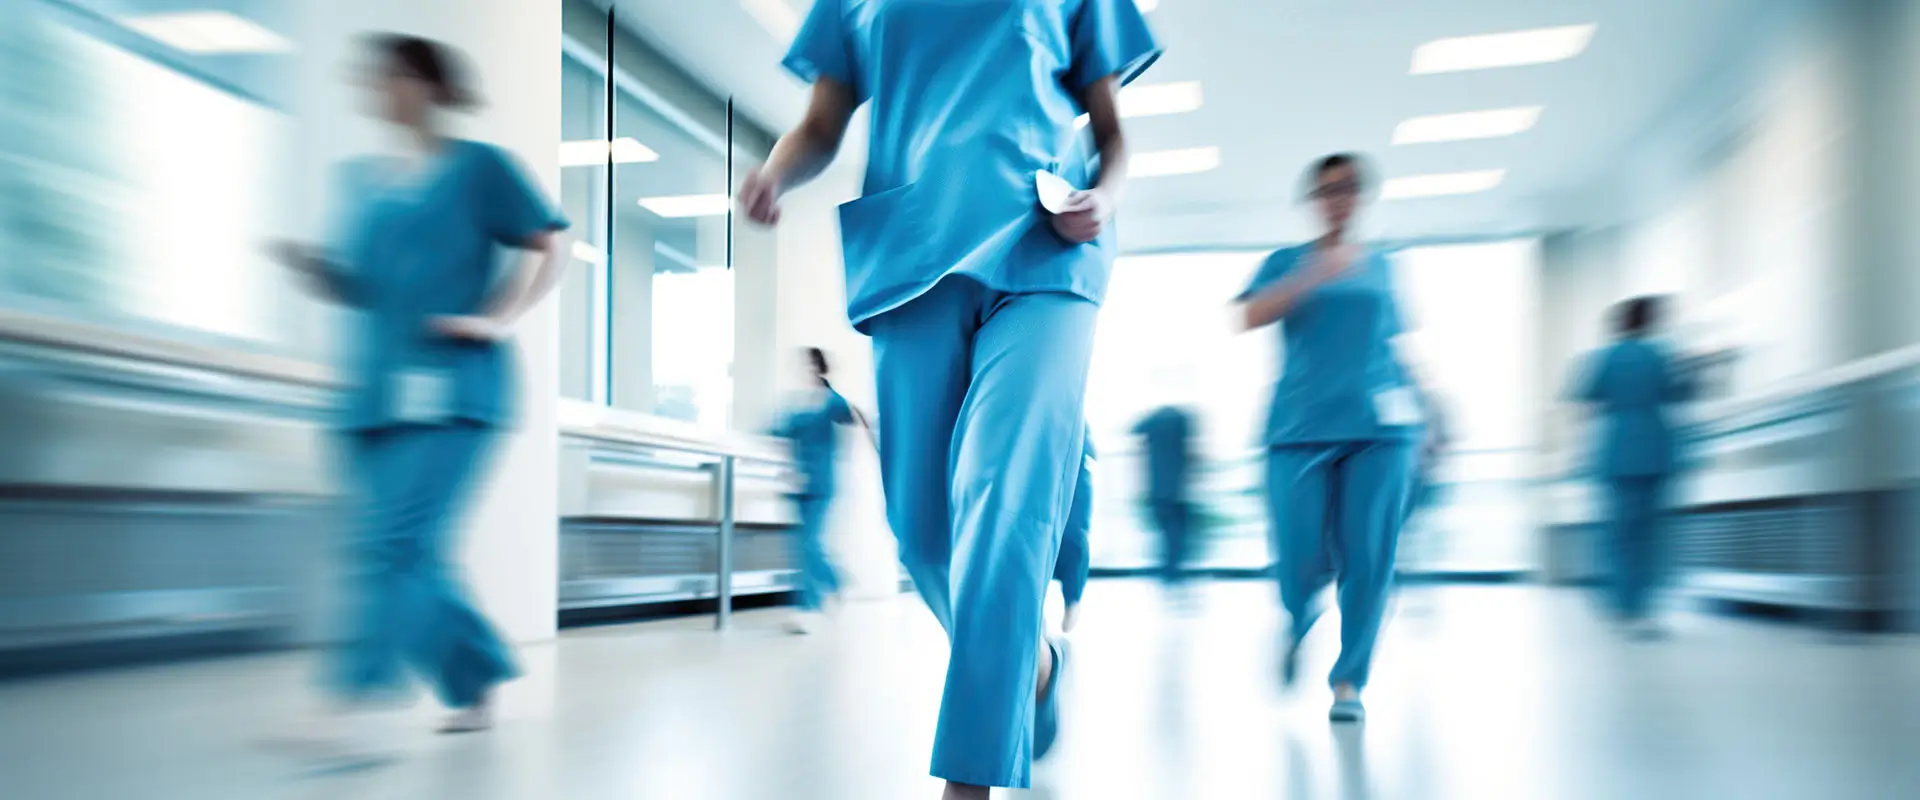 Healthcare and medical staff in motion blur